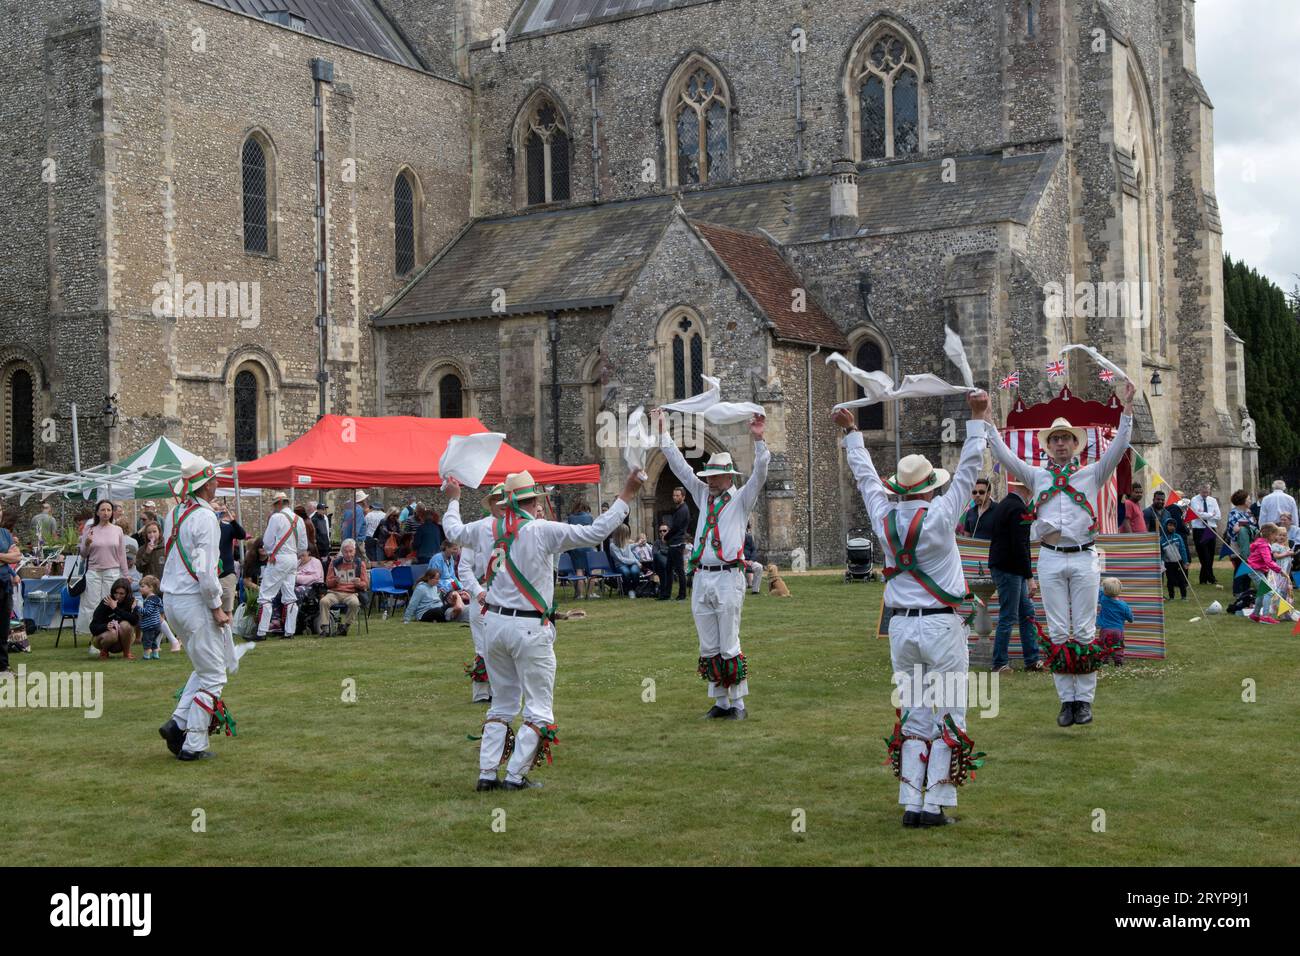 The Hospital of St Cross and Almshouse of Noble Poverty annual summer fete that has taken place for over 150 years. Morris dancing in the background the Church of St Cross a private chapel of the Hospital of St Cross. About 2,000 people attended in 2022. Winchester, Hampshire, England 25th June 2022.  2020s UK HOMER SYKES Stock Photo